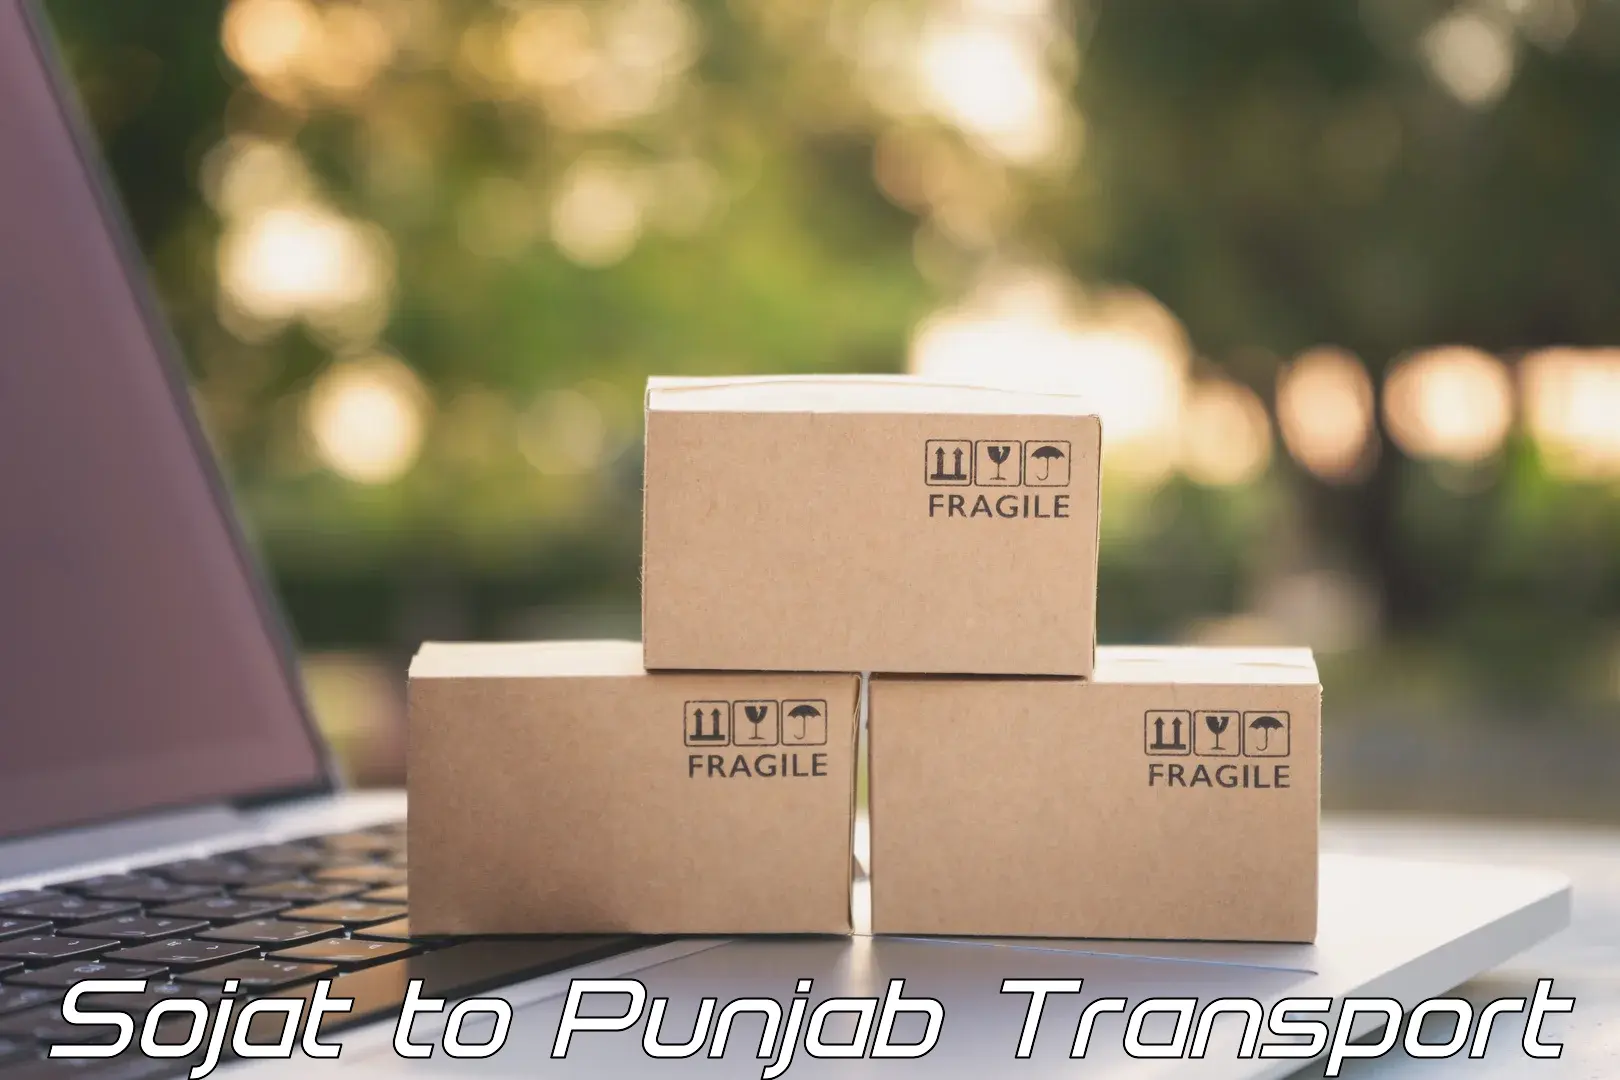 Transport shared services Sojat to Patiala